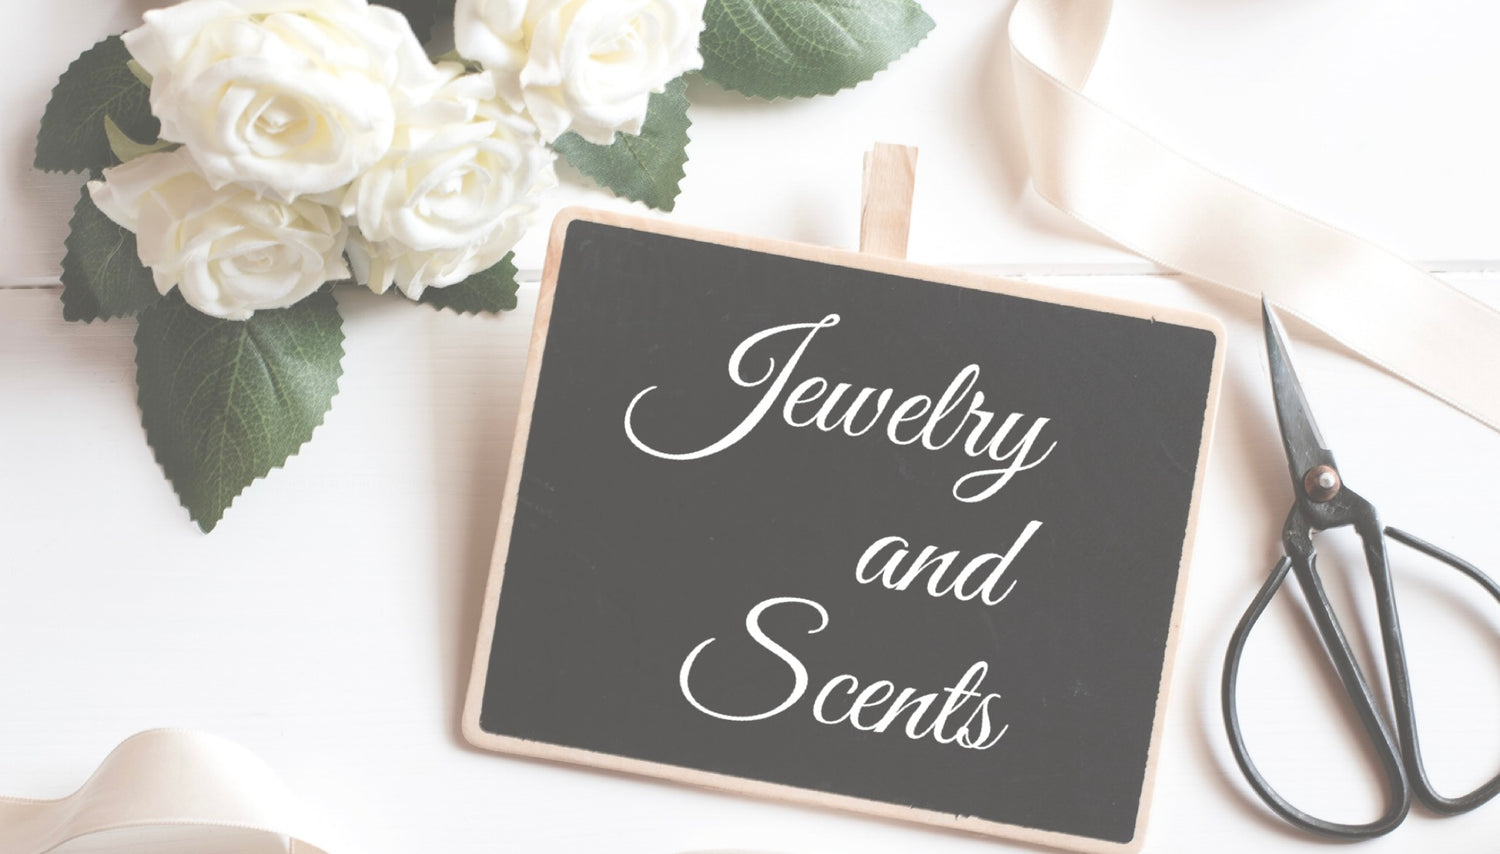 Jewelry and Scents